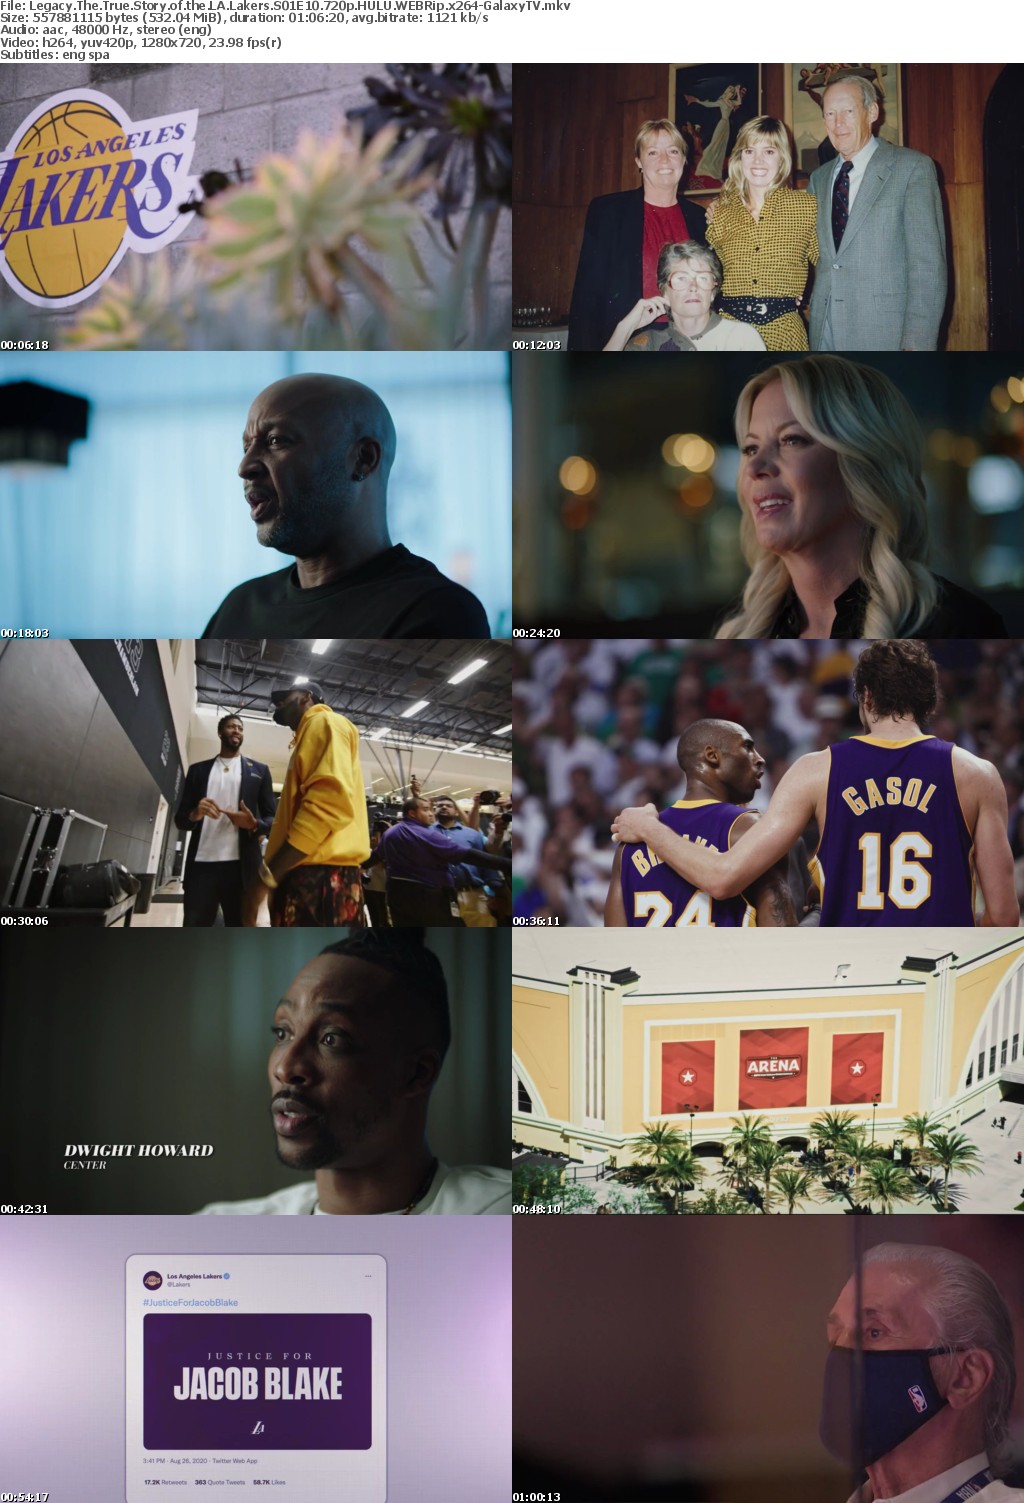 Legacy The True Story of the LA Lakers S01 COMPLETE 720p HULU WEBRip x264-GalaxyTV